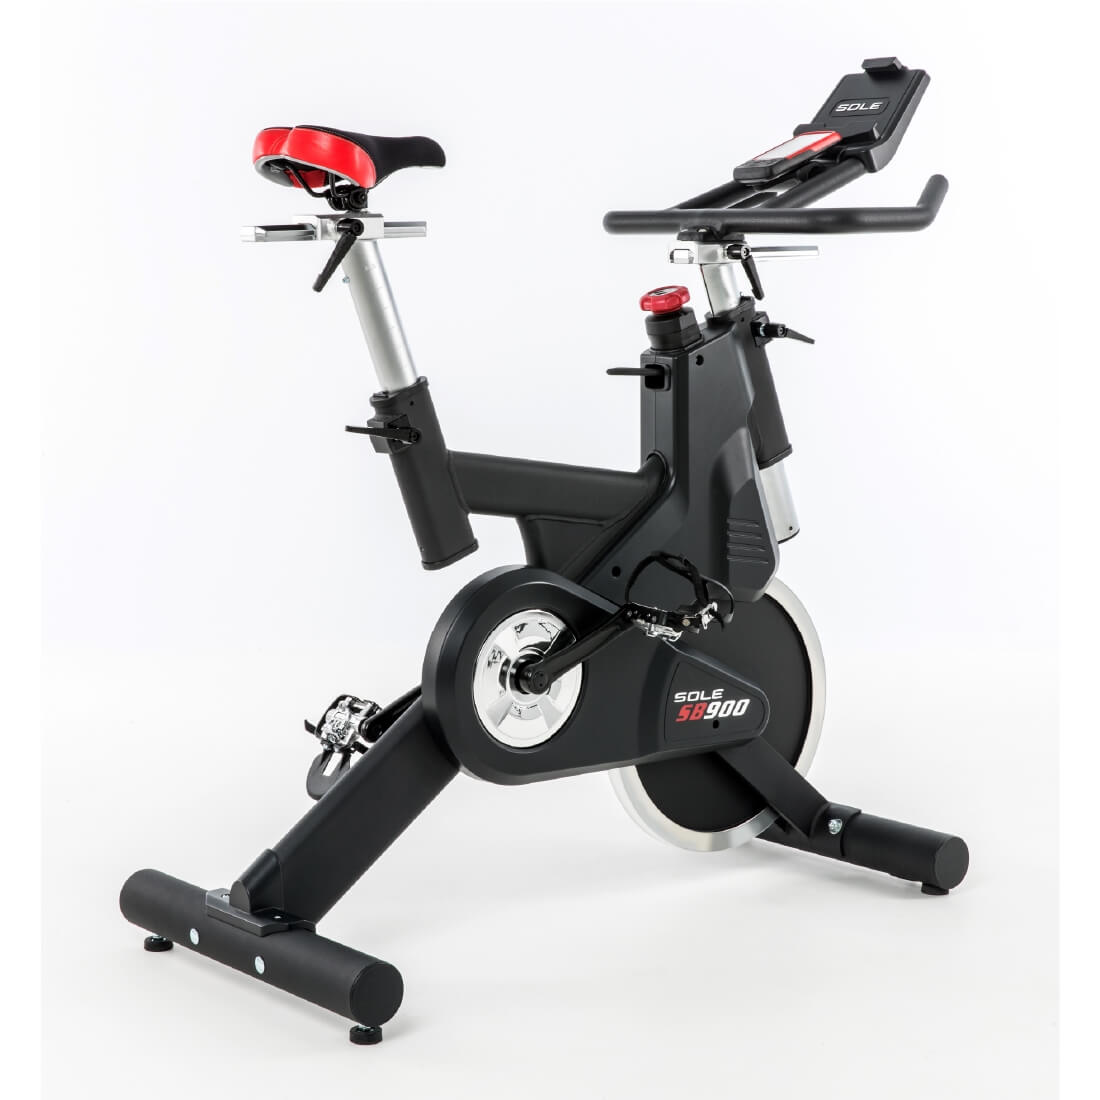 Sole SB900 Spin Exercise Bike